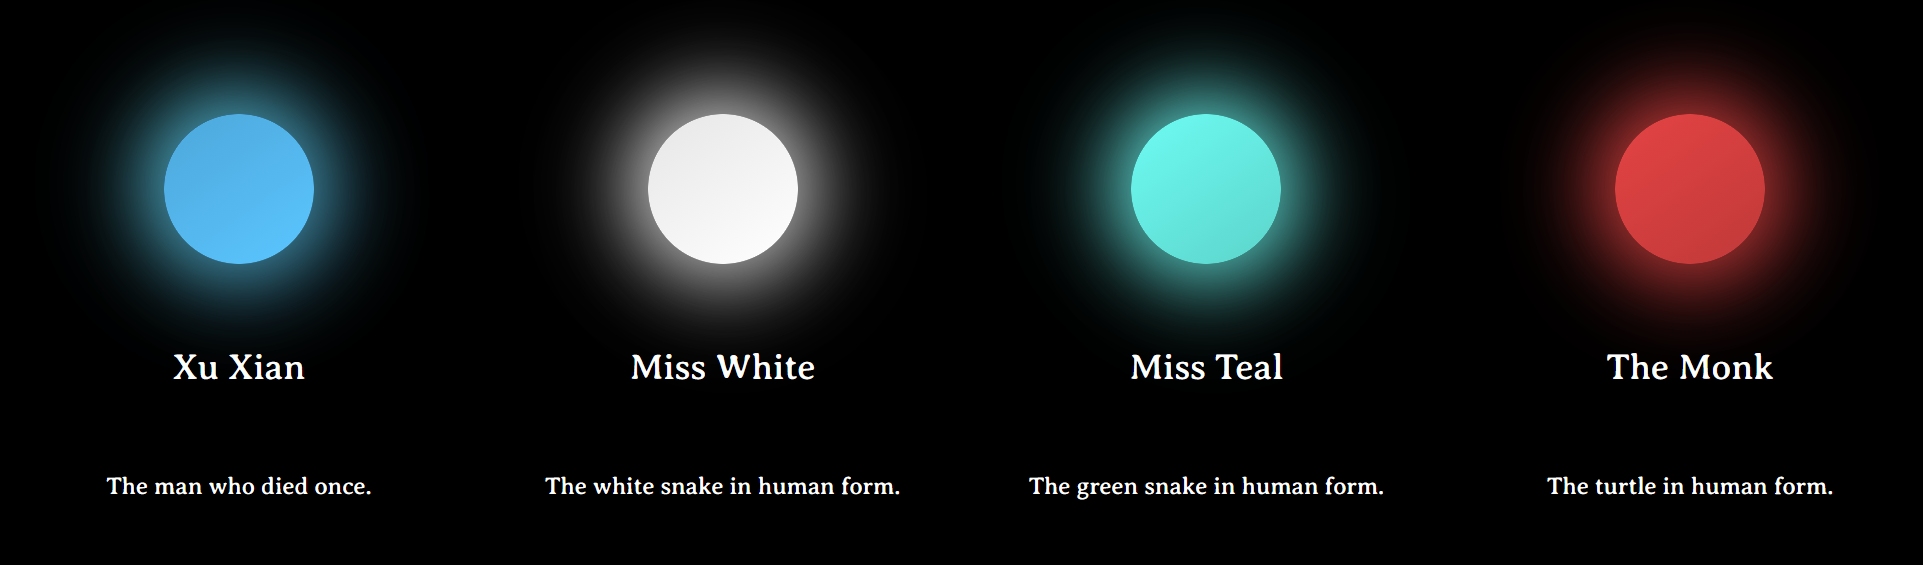 assets/white-snake/demo2.png